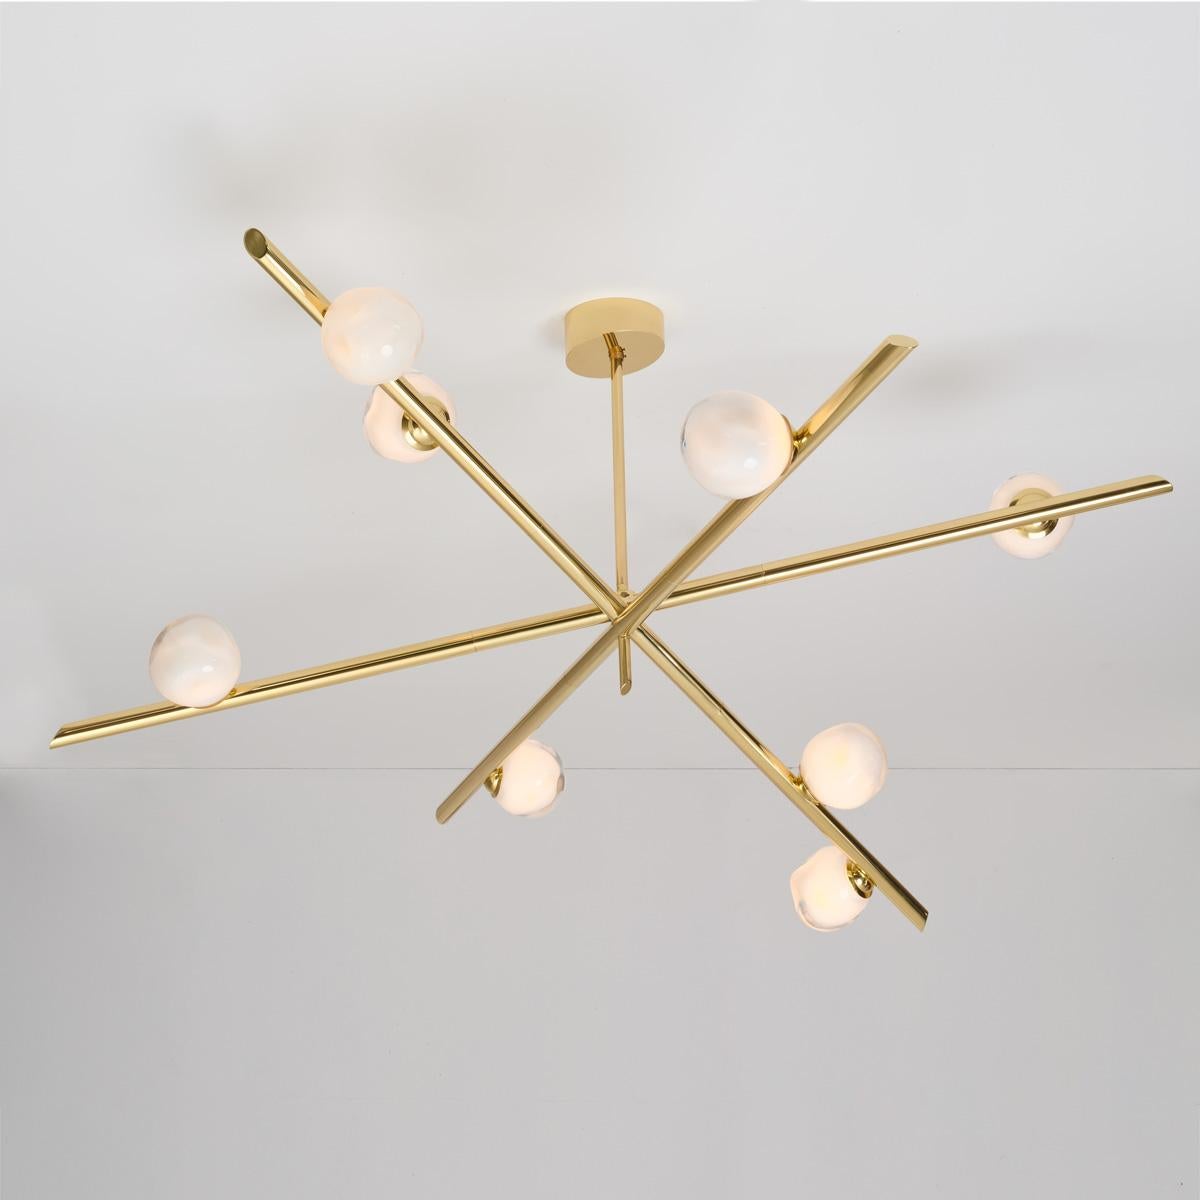 Antares X3 Ceiling Light by Gaspare Asaro-Polished Nickel In New Condition For Sale In New York, NY